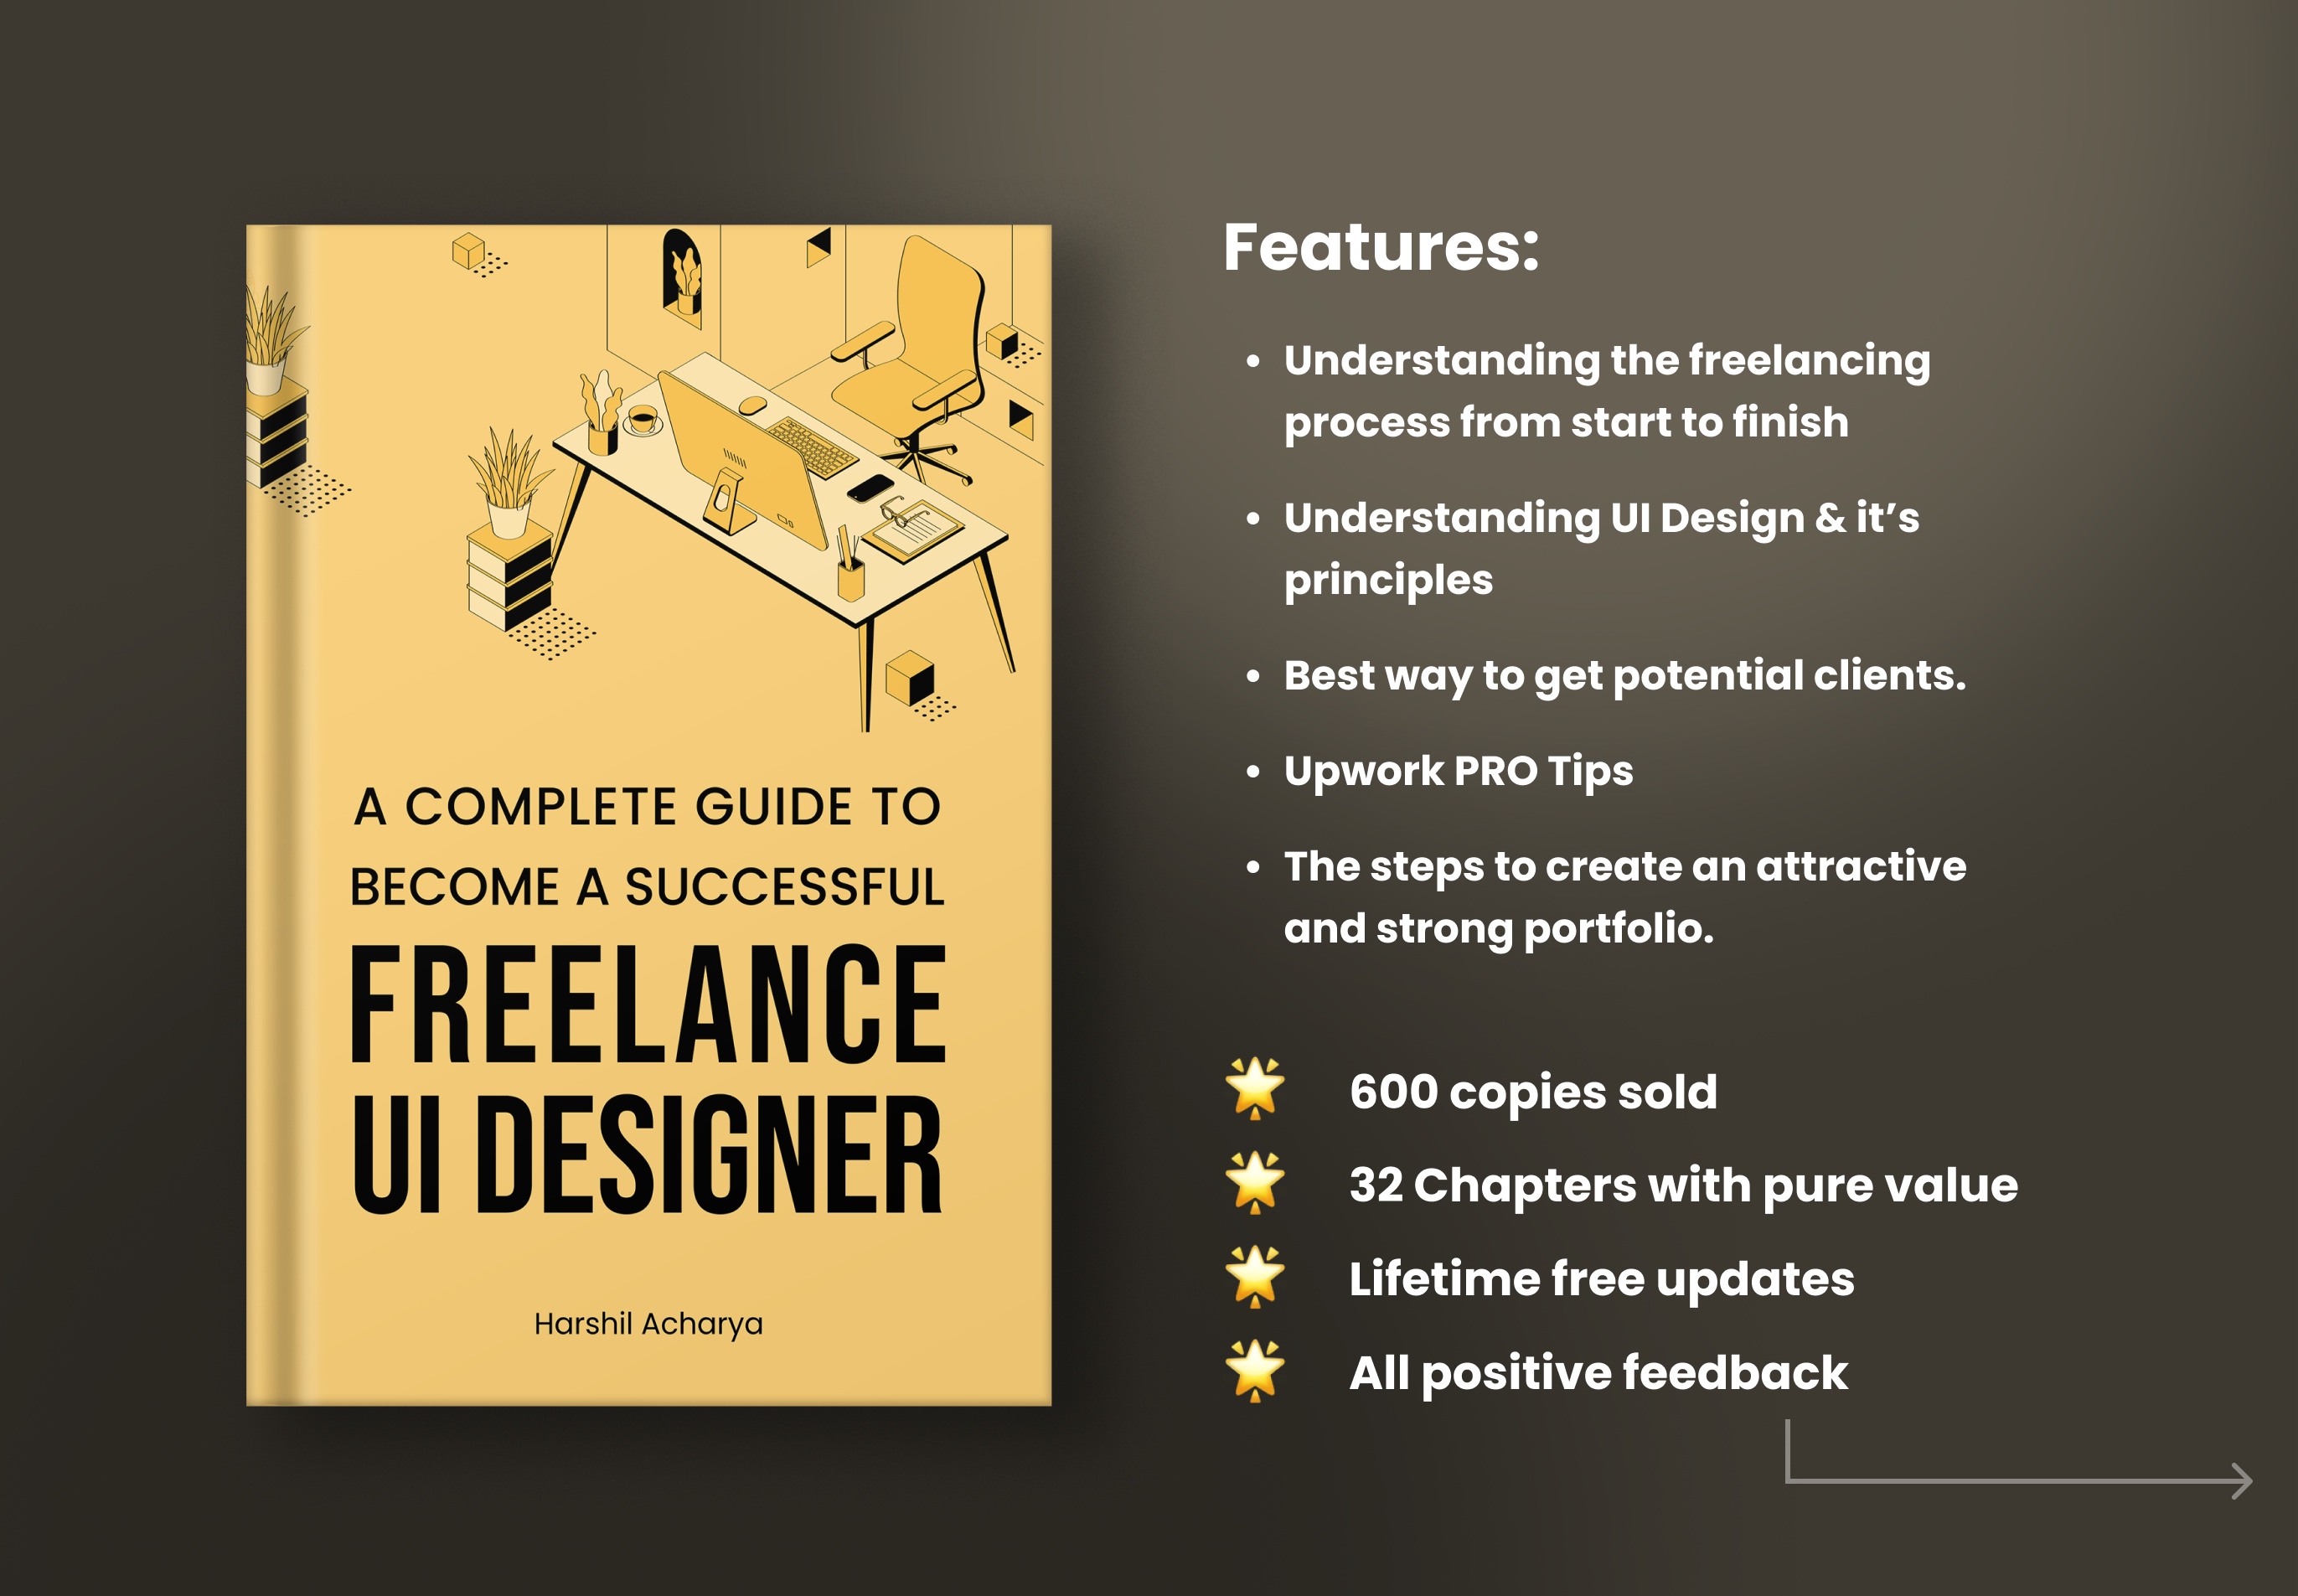 [VIP] Harshil Acharya: A complete guide to become a Successful Freelance UI Designer